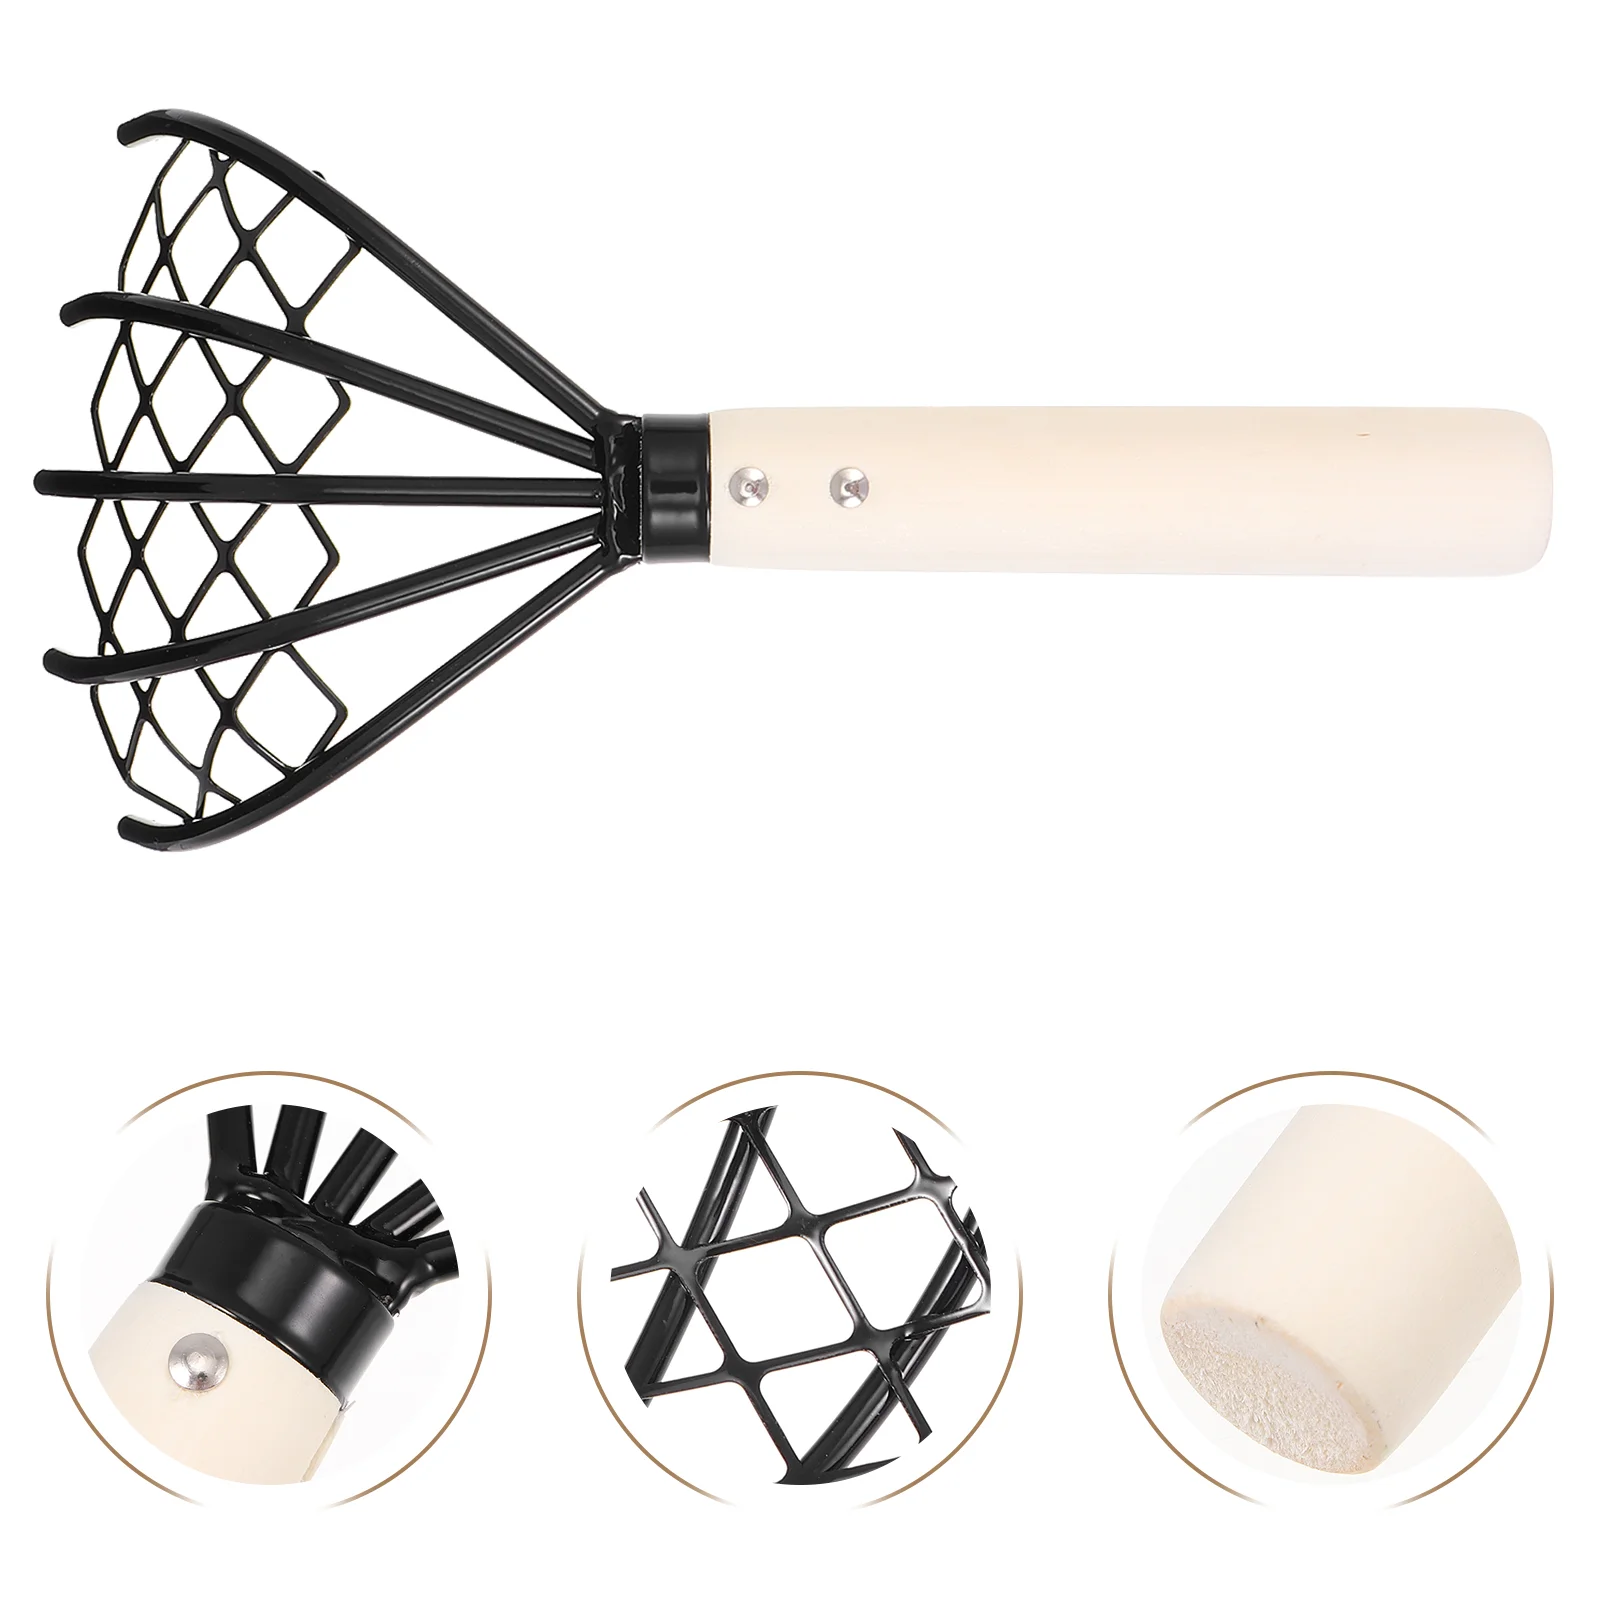 

Rake Clam Hand Claw Garden Seafood Digging Beach Fork Shell Cultivator Digger Tool Leaf Clamming Handle Net Mesh Tools Scraper